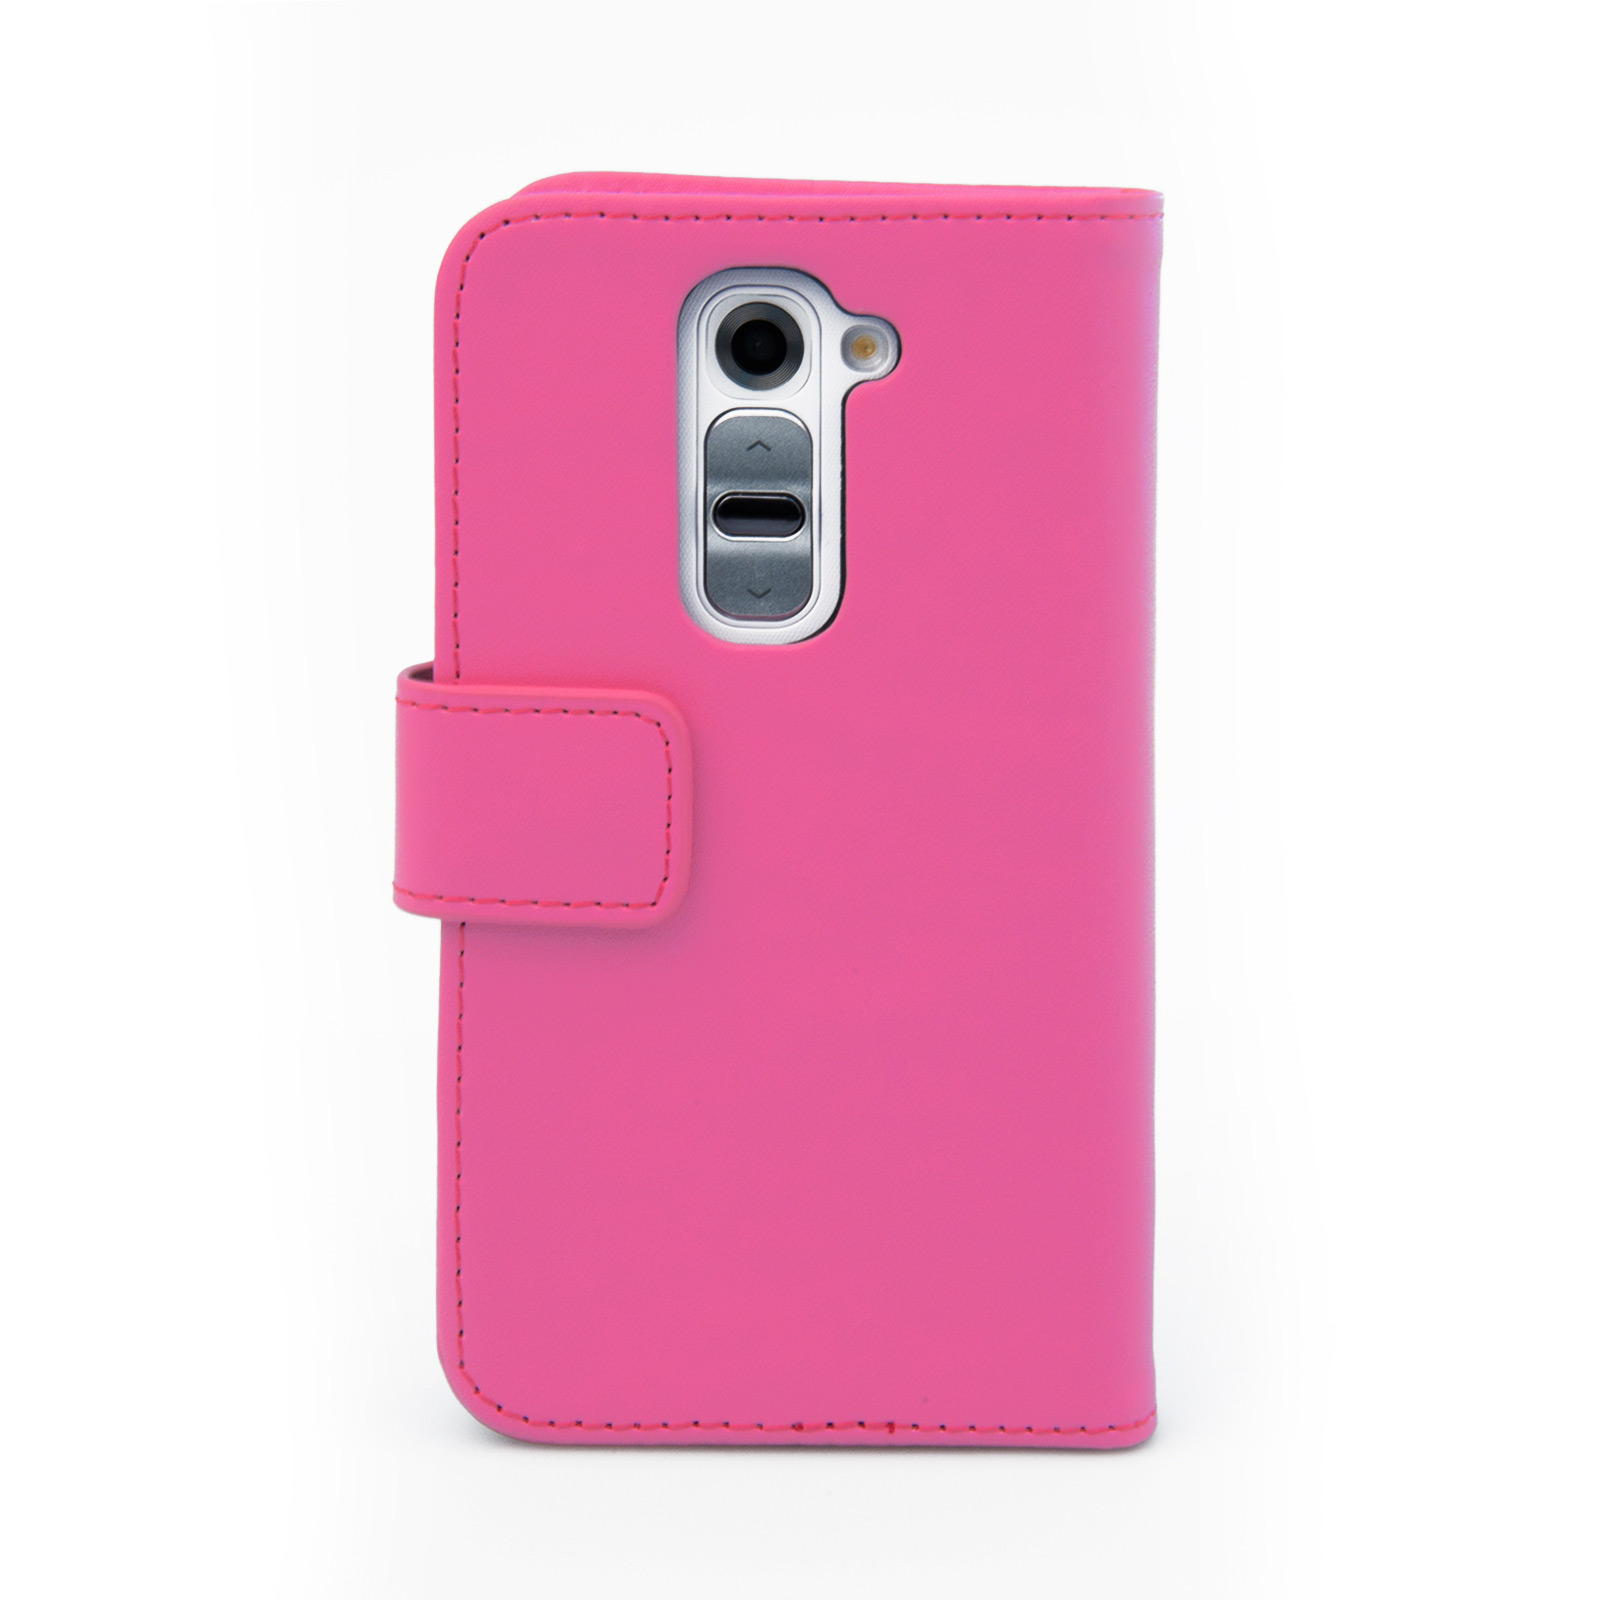 YouSave Accessories LG G2 Mini Leather-Effect Wallet Case - Hot Pink